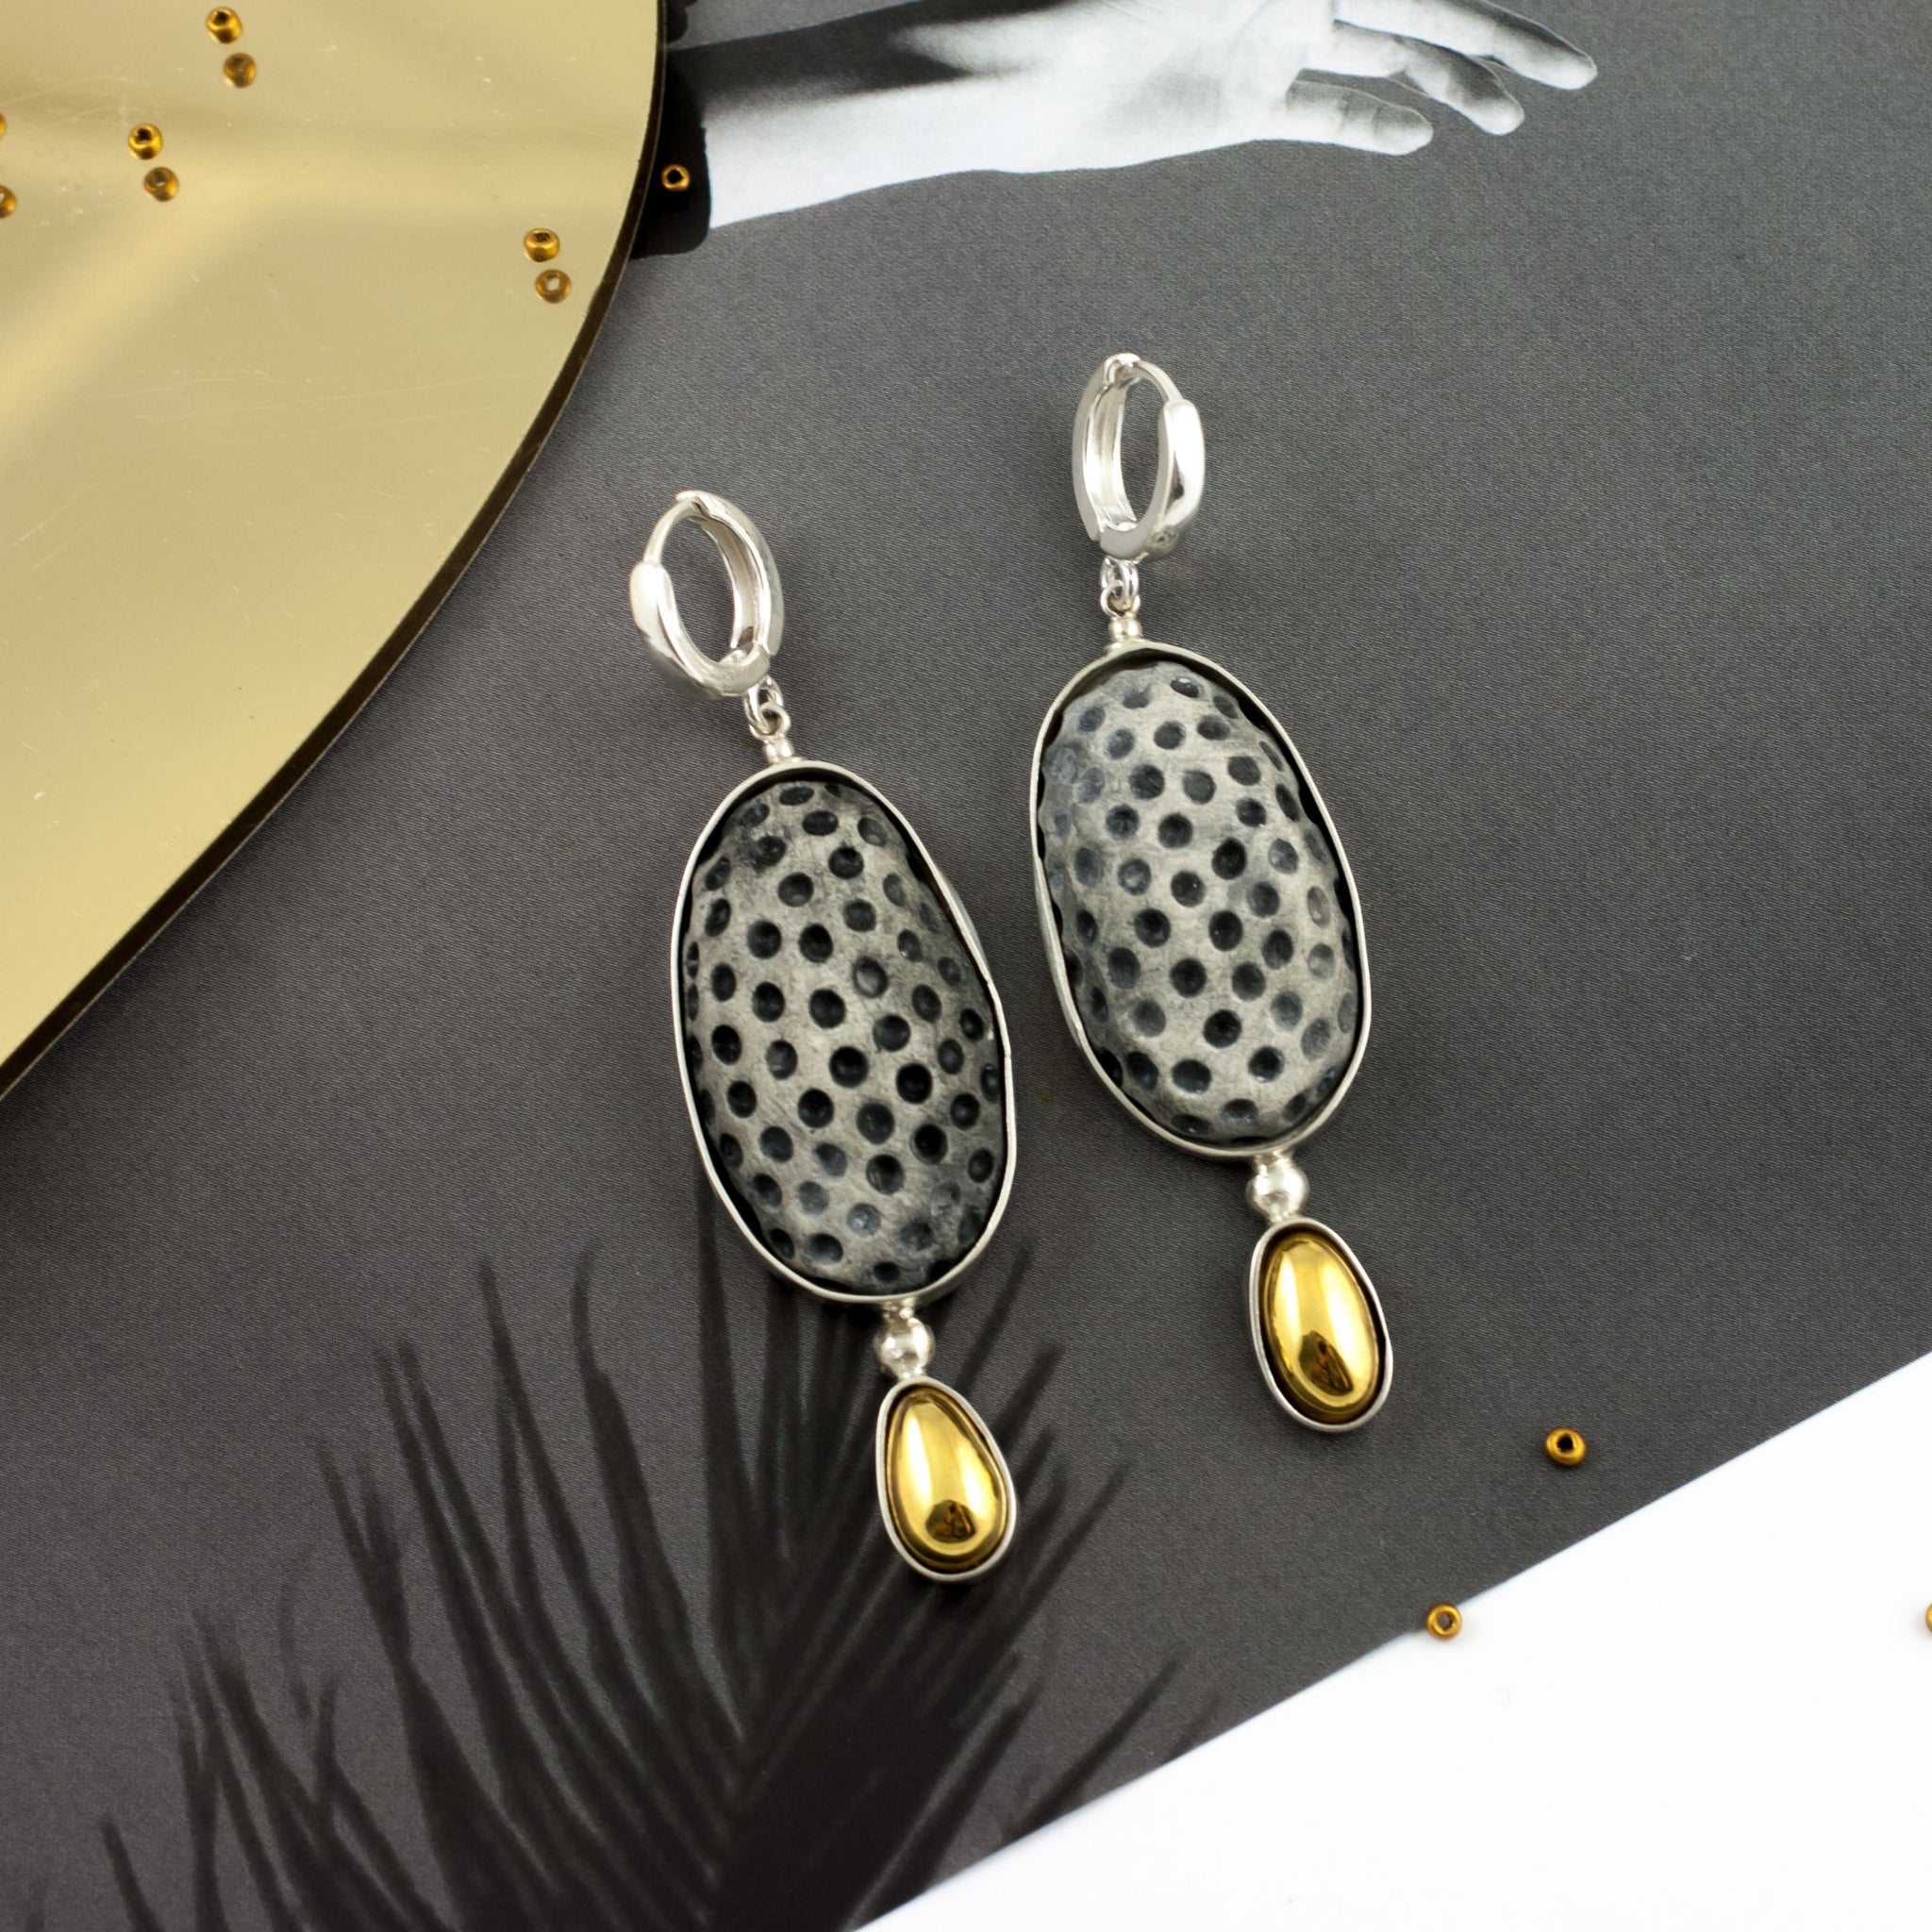 Gold plated dangle earrings with black color dots